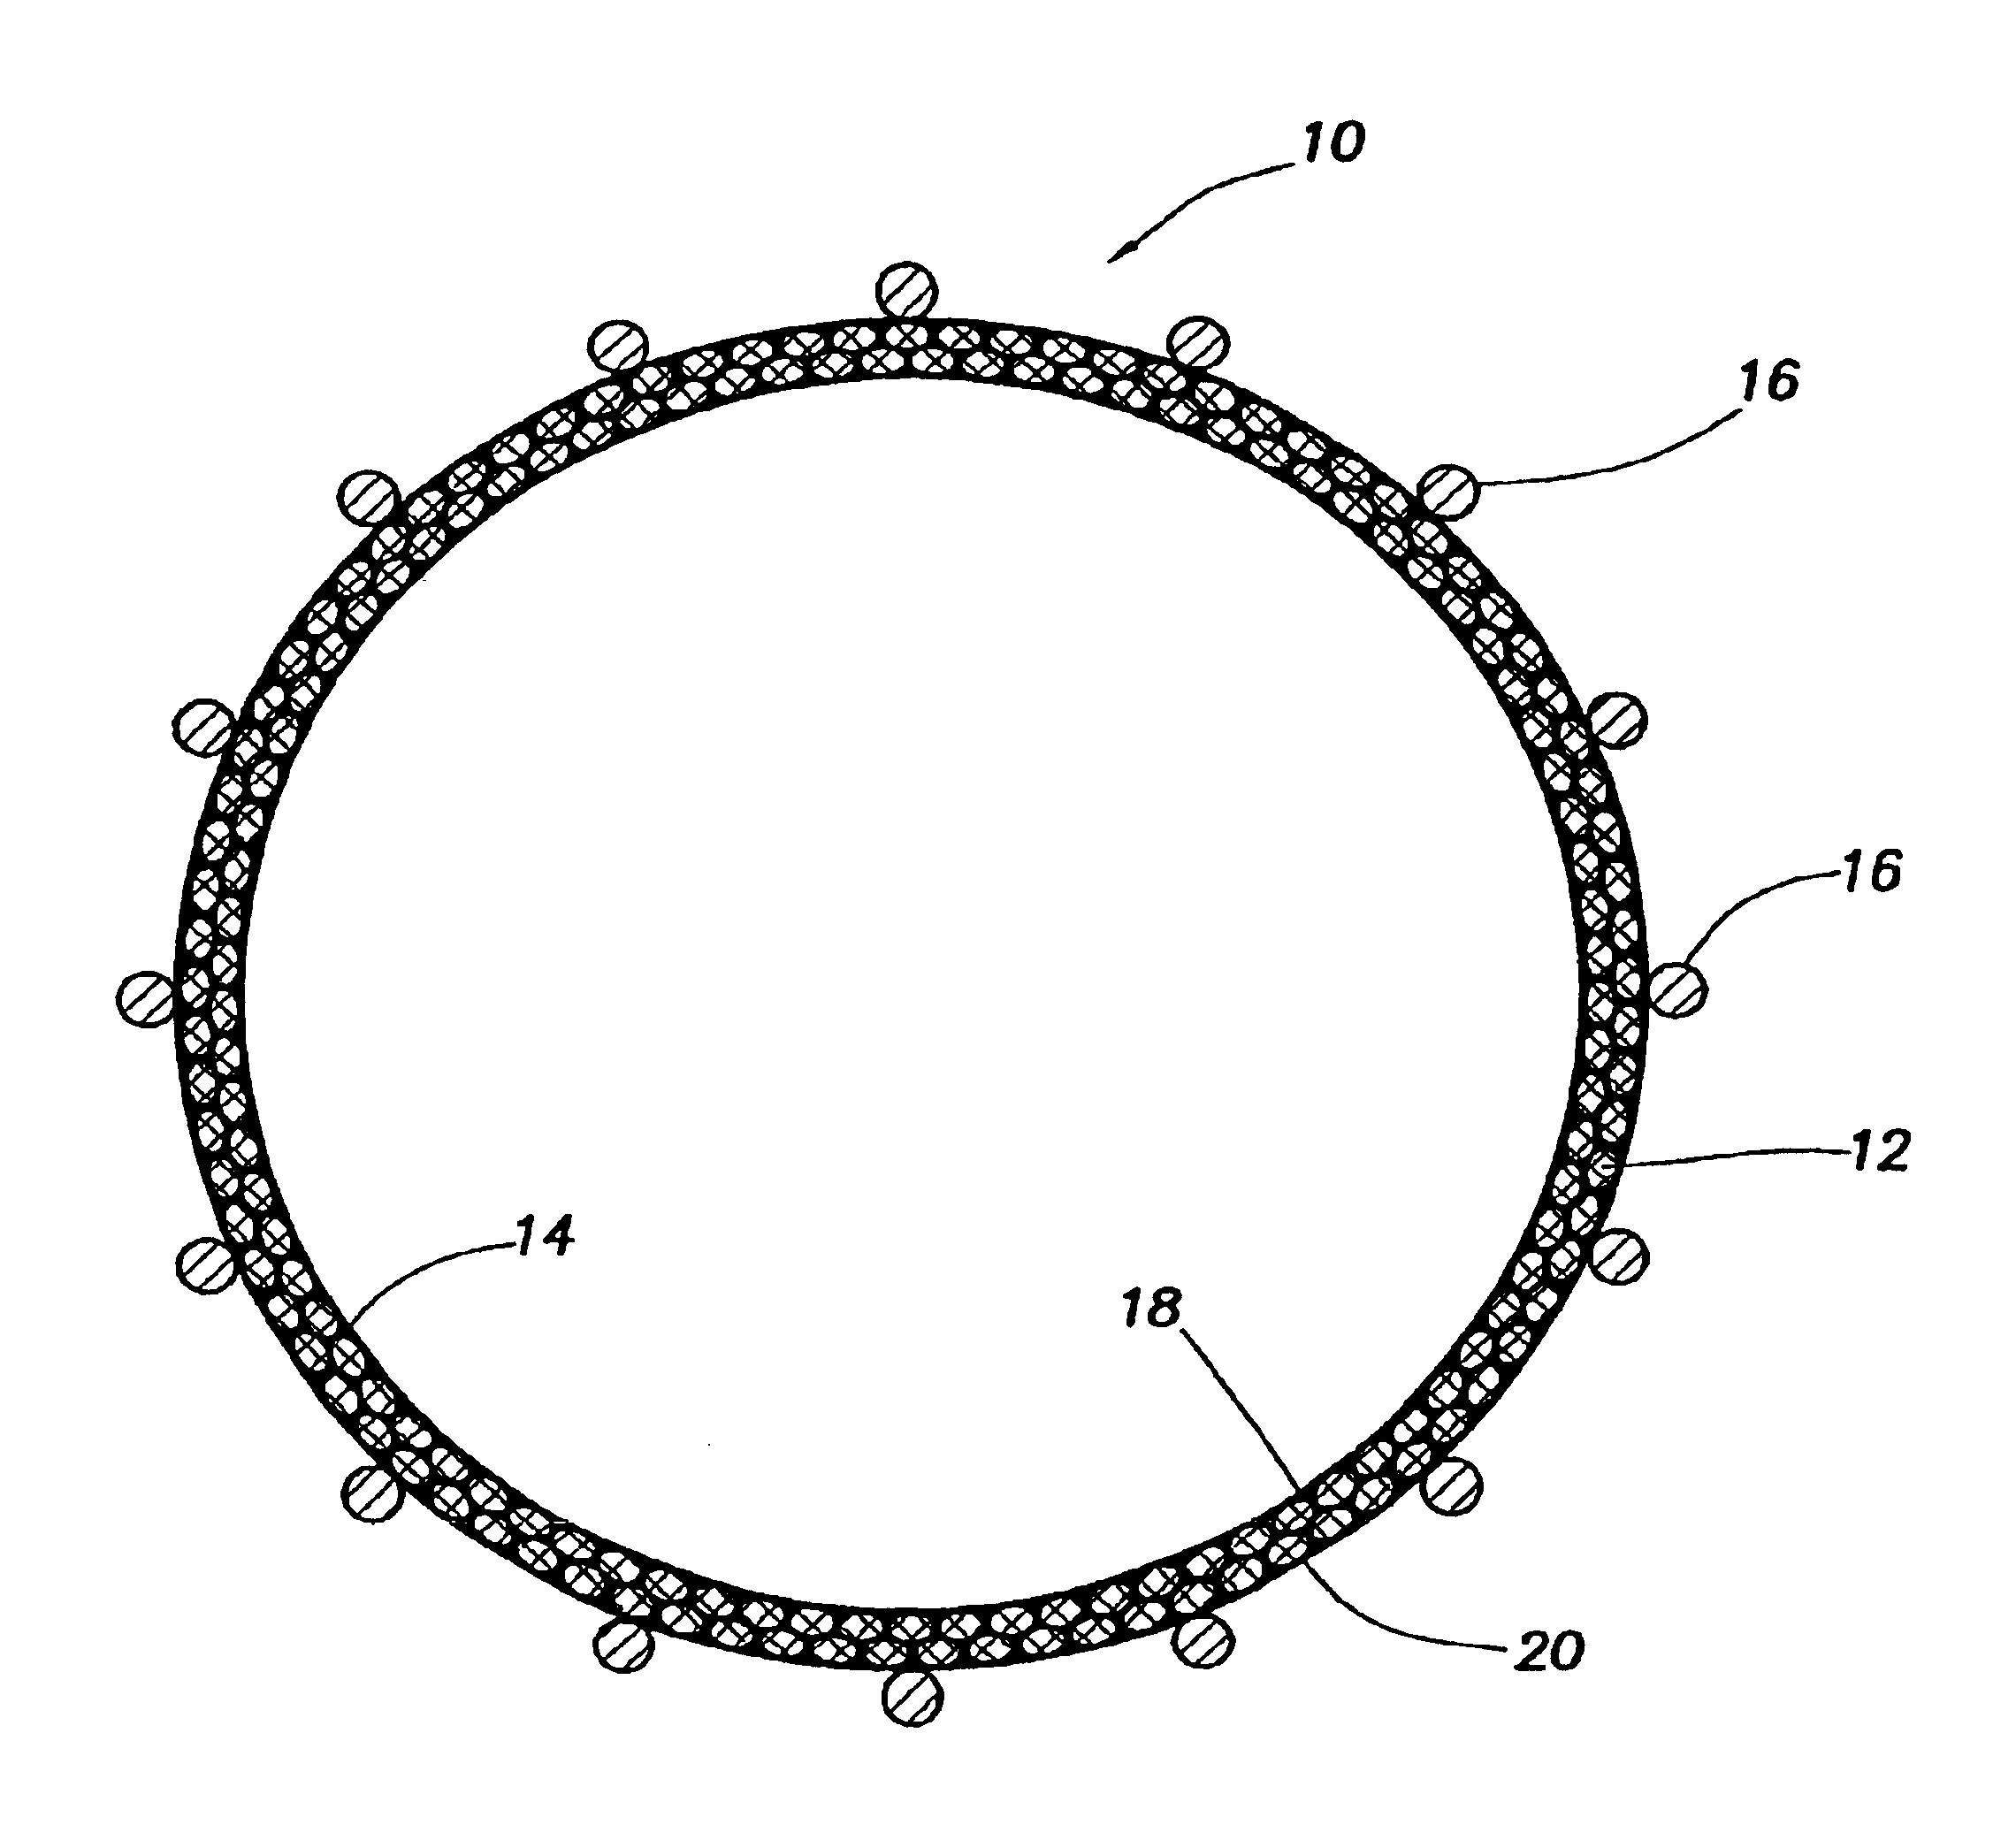 Coated vascular grafts and methods of use